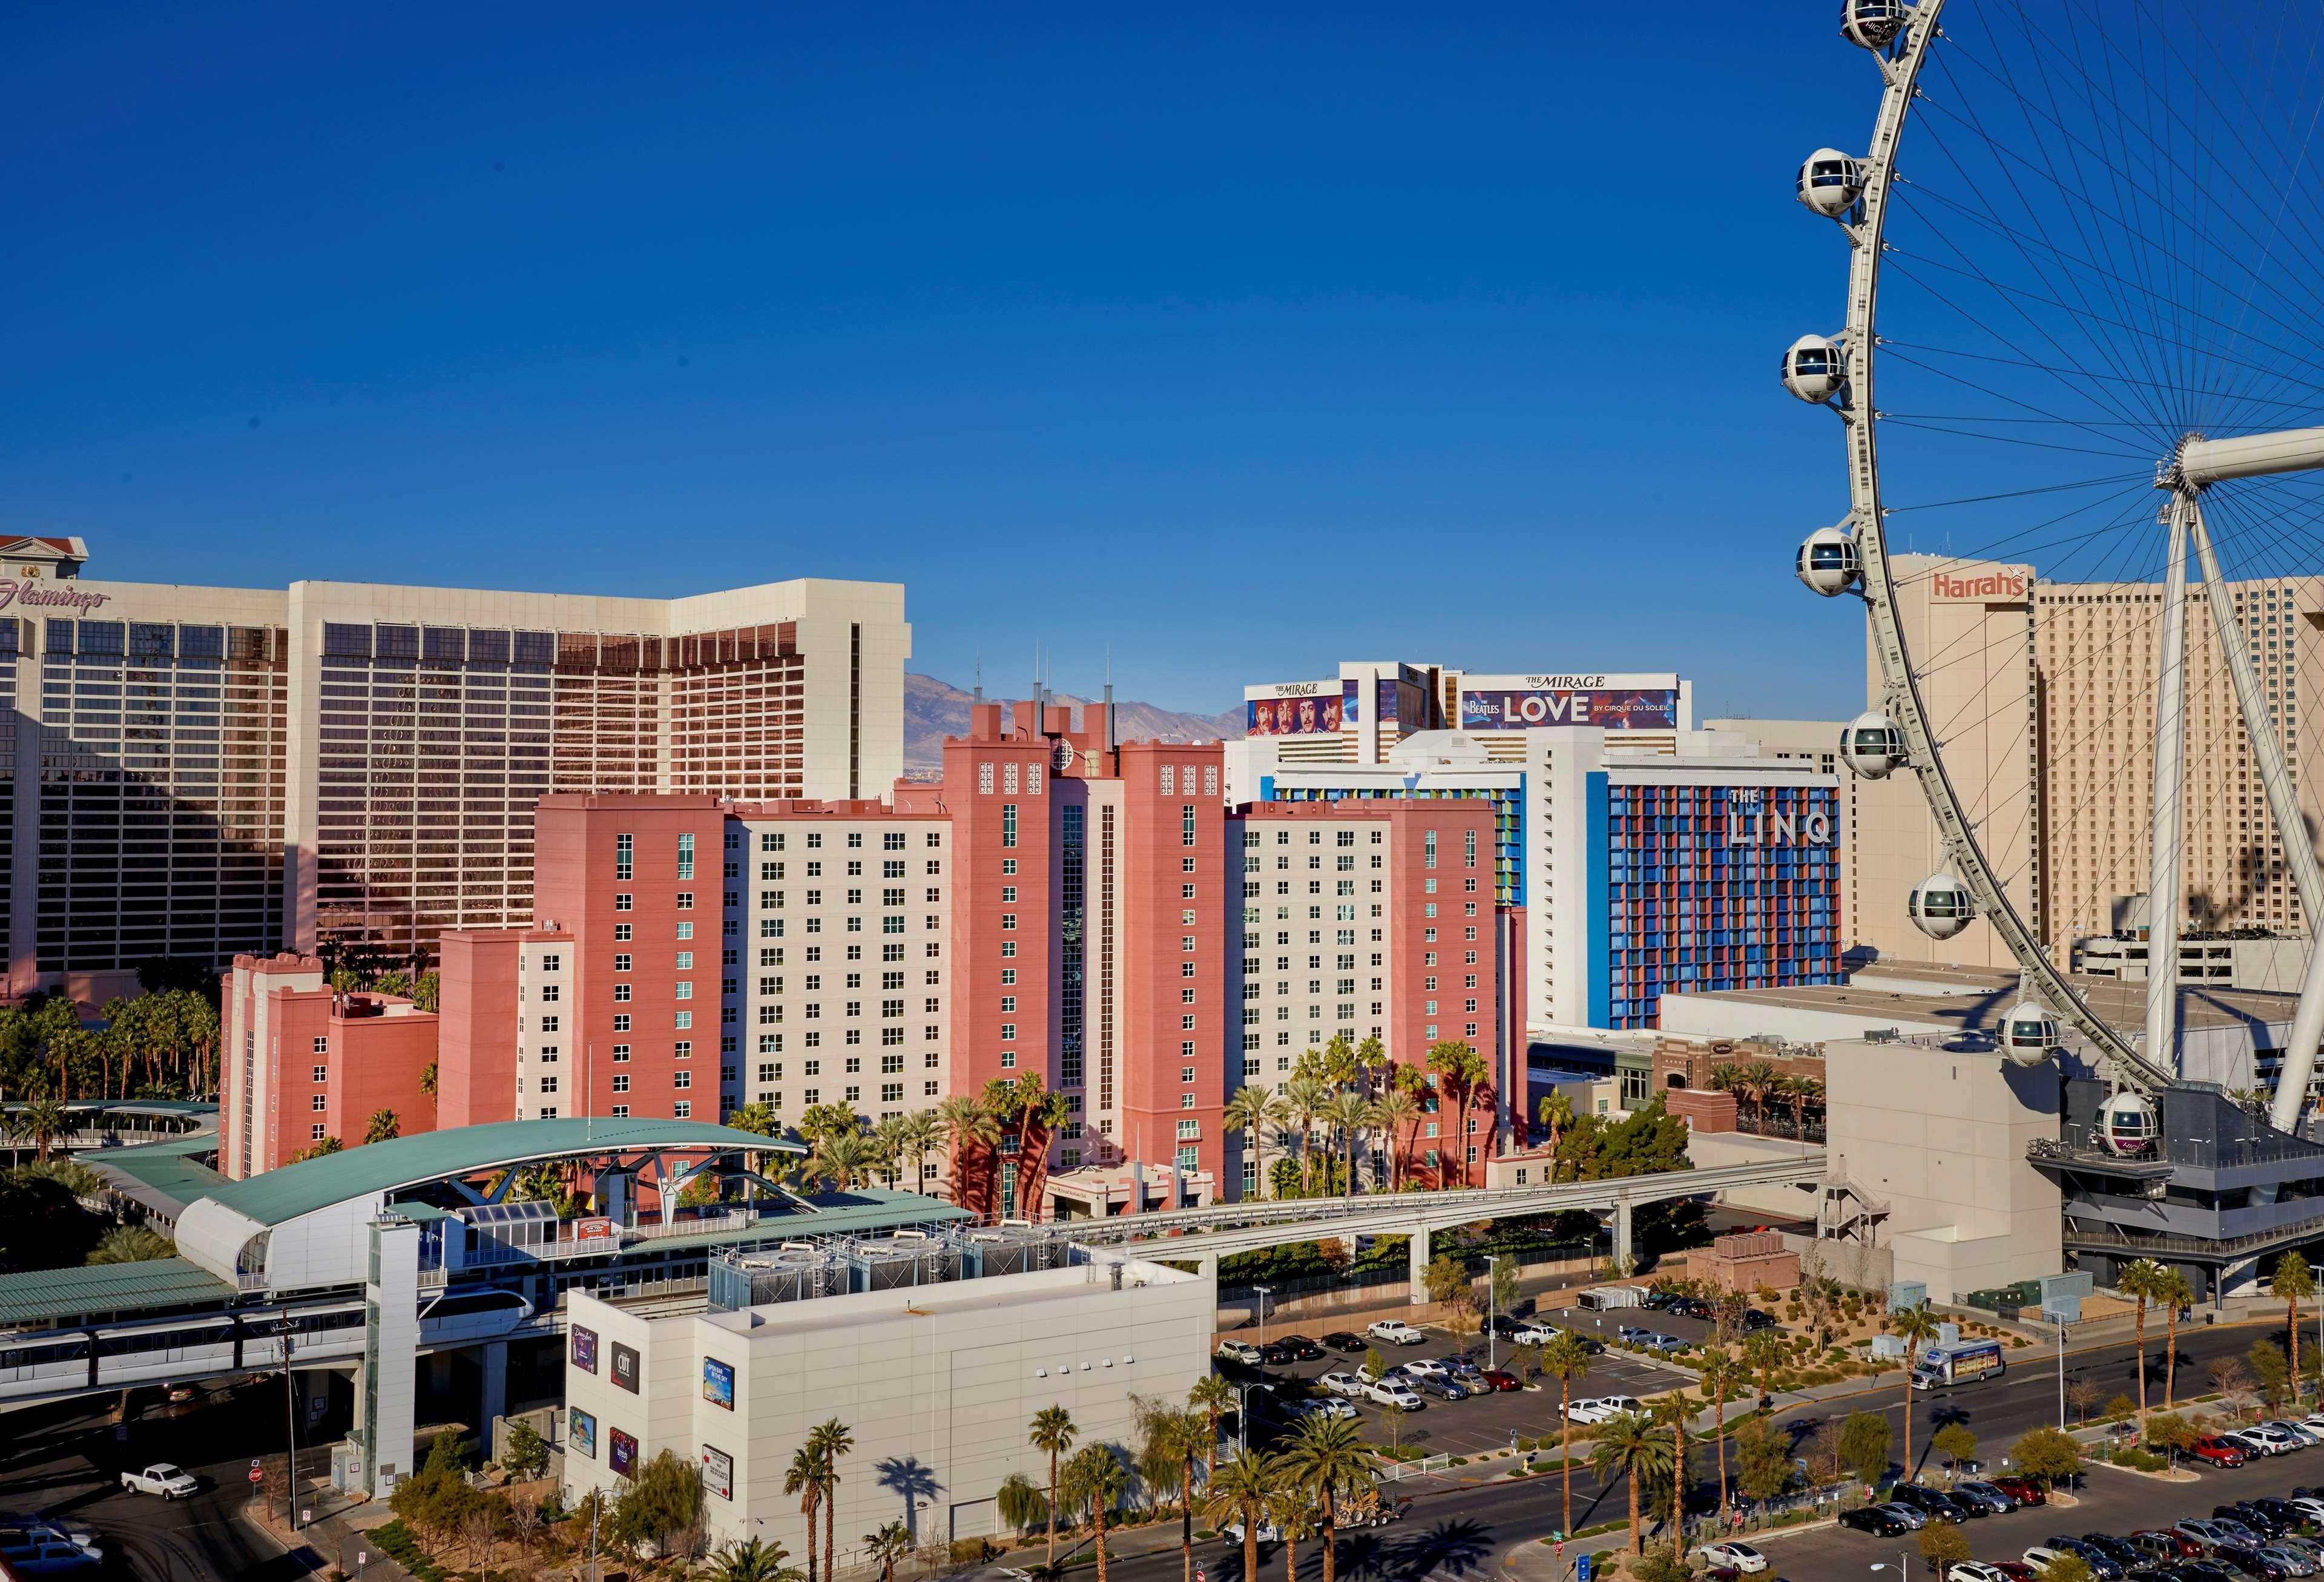 HOTEL HILTON GRAND VACATIONS CLUB FLAMINGO LAS VEGAS, NV 4* (United States)  - from C$ 151 | iBOOKED